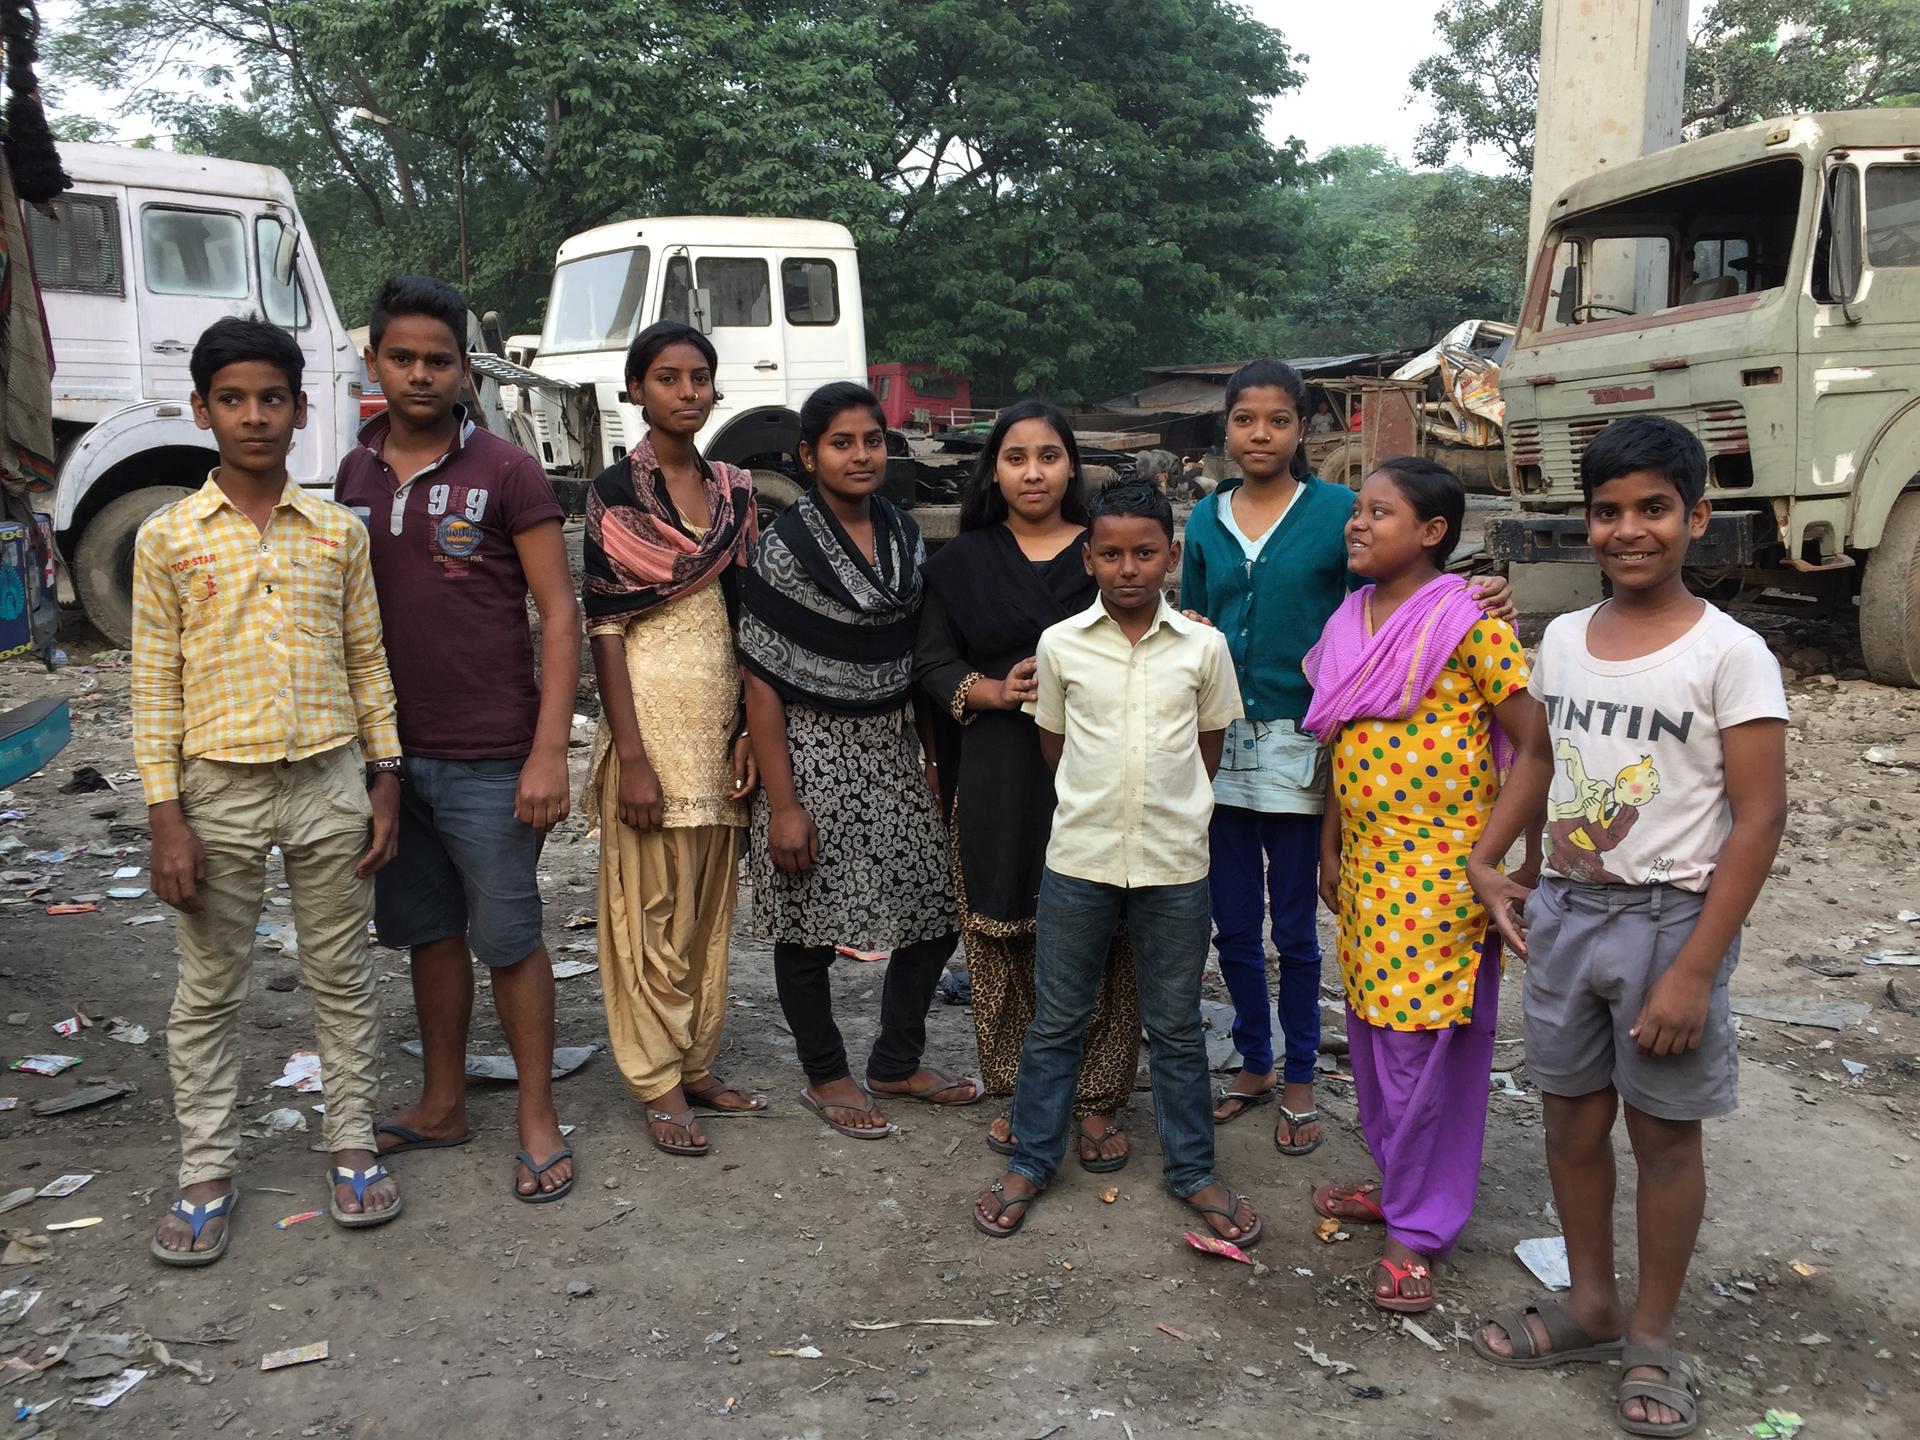 A group of children from the Shaktimaan group pose together in a slum in Kolkata, India, convincing child dropouts to go back to school. 